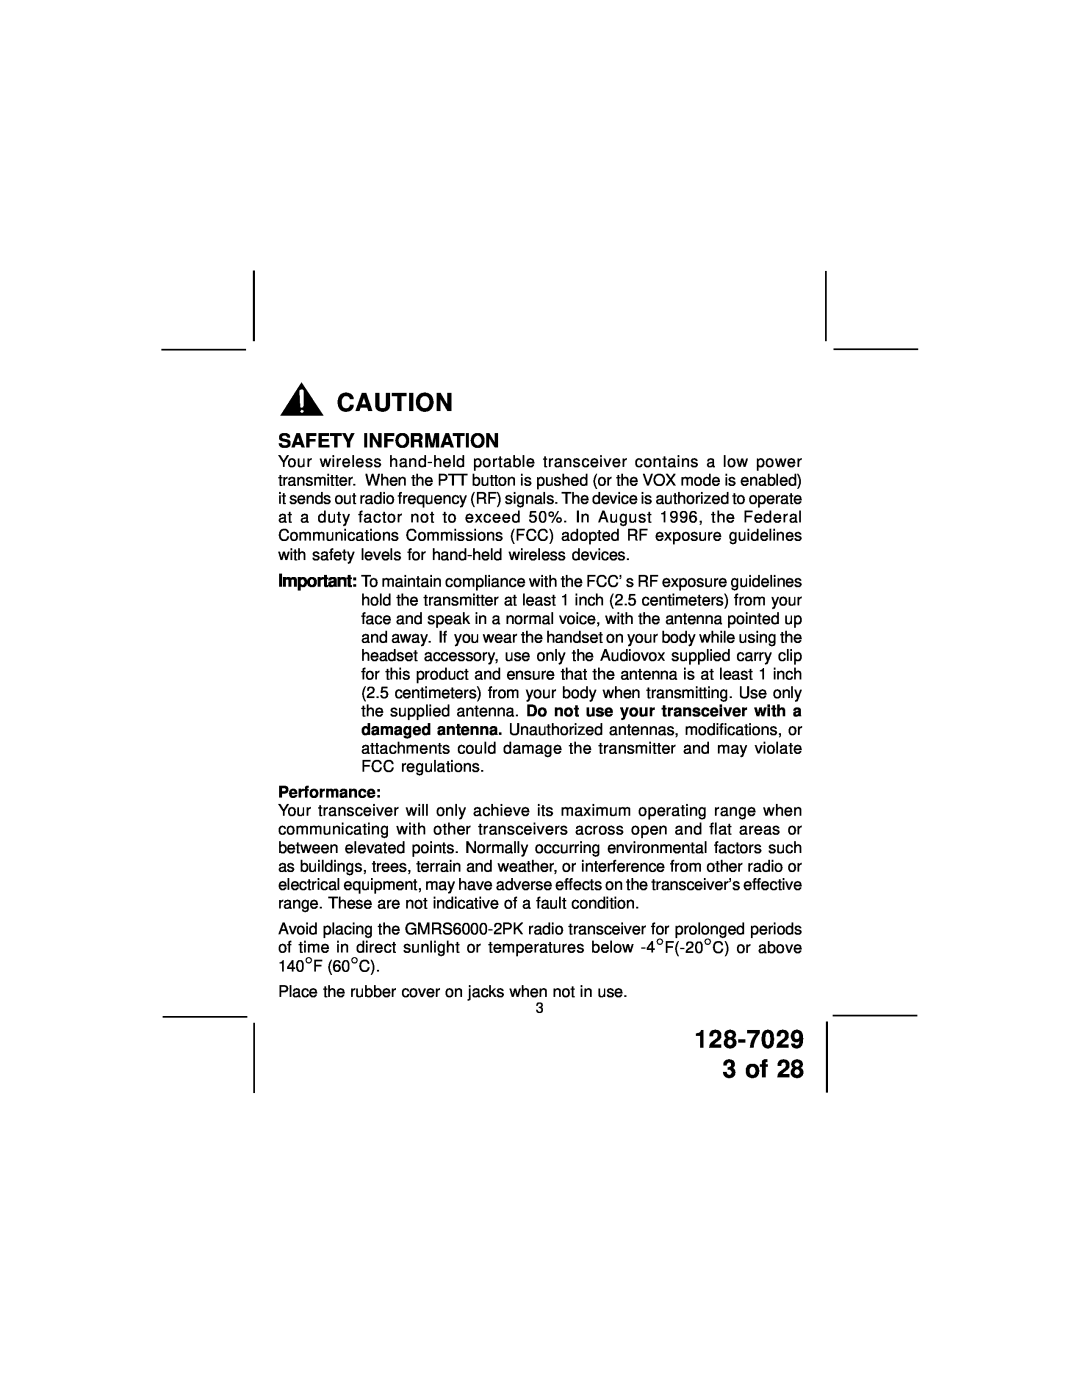 Audiovox GMRS6000-2PK owner manual 128-7029 3 of, Safety Information, Performance 